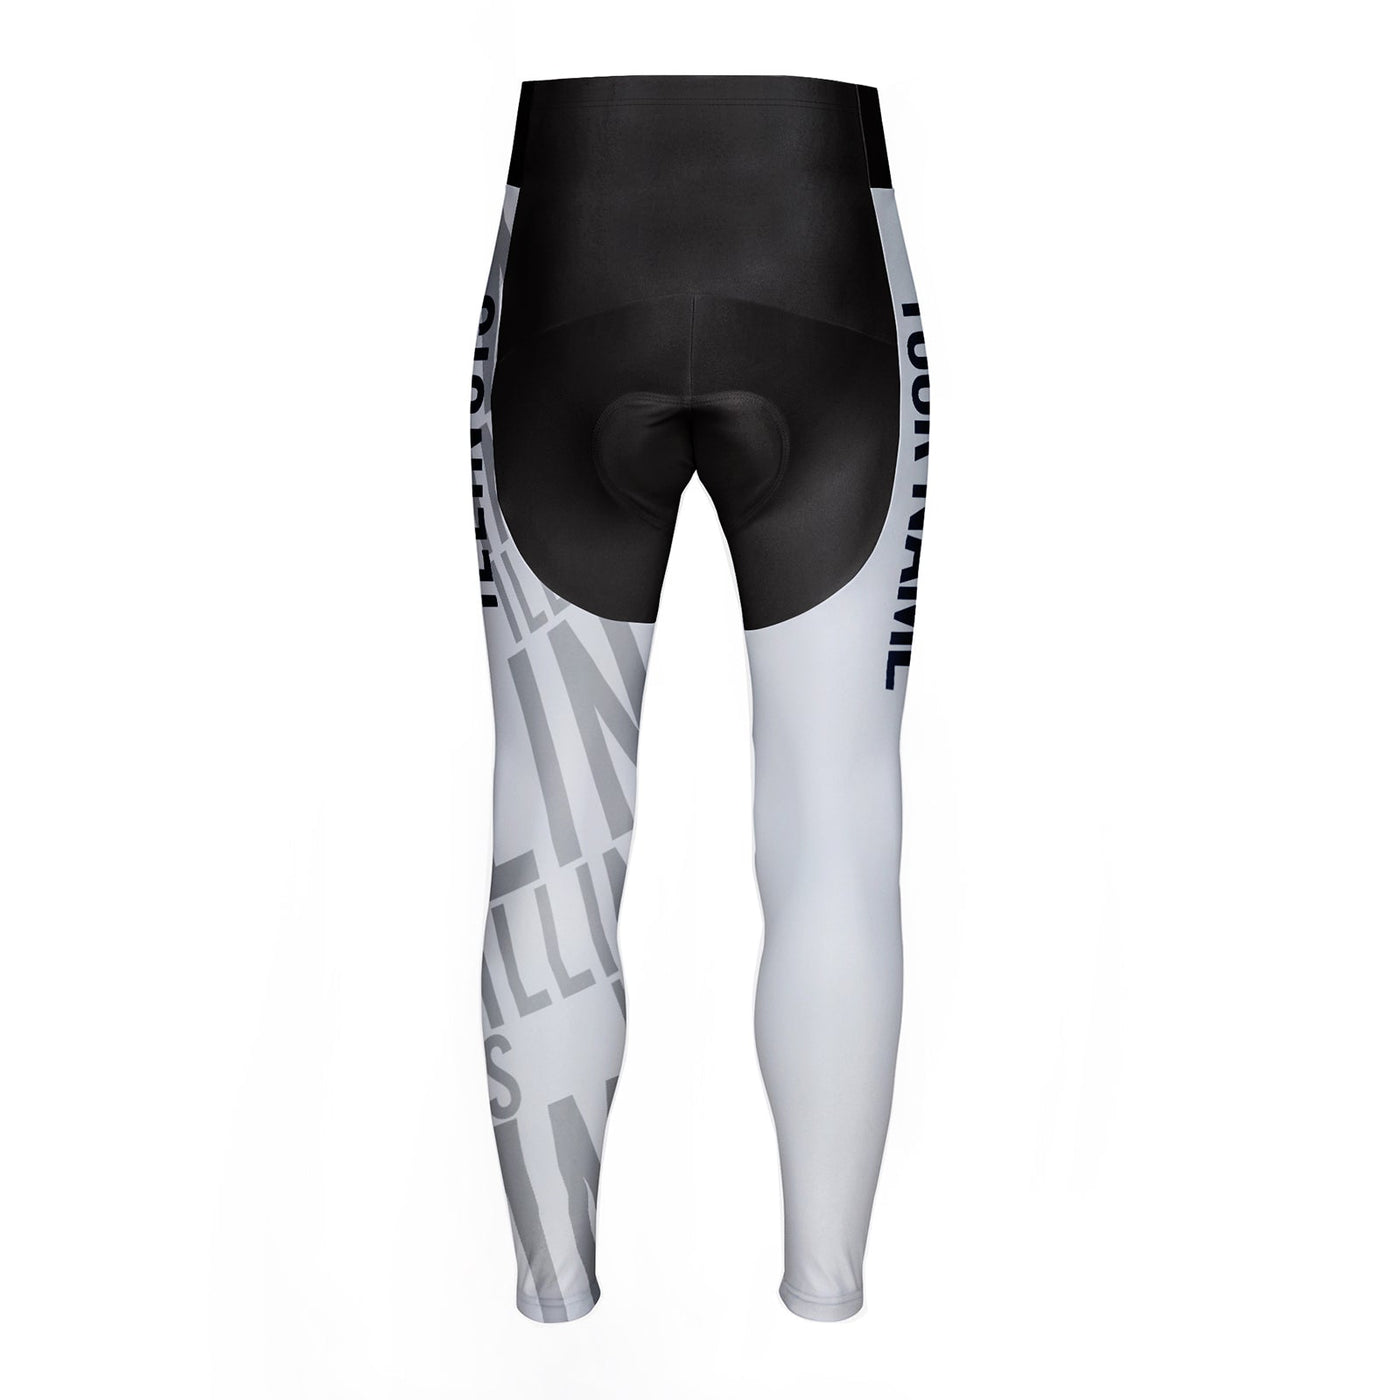 Customized Illinois Unisex Thermal Fleece Cycling Tights Long Pants